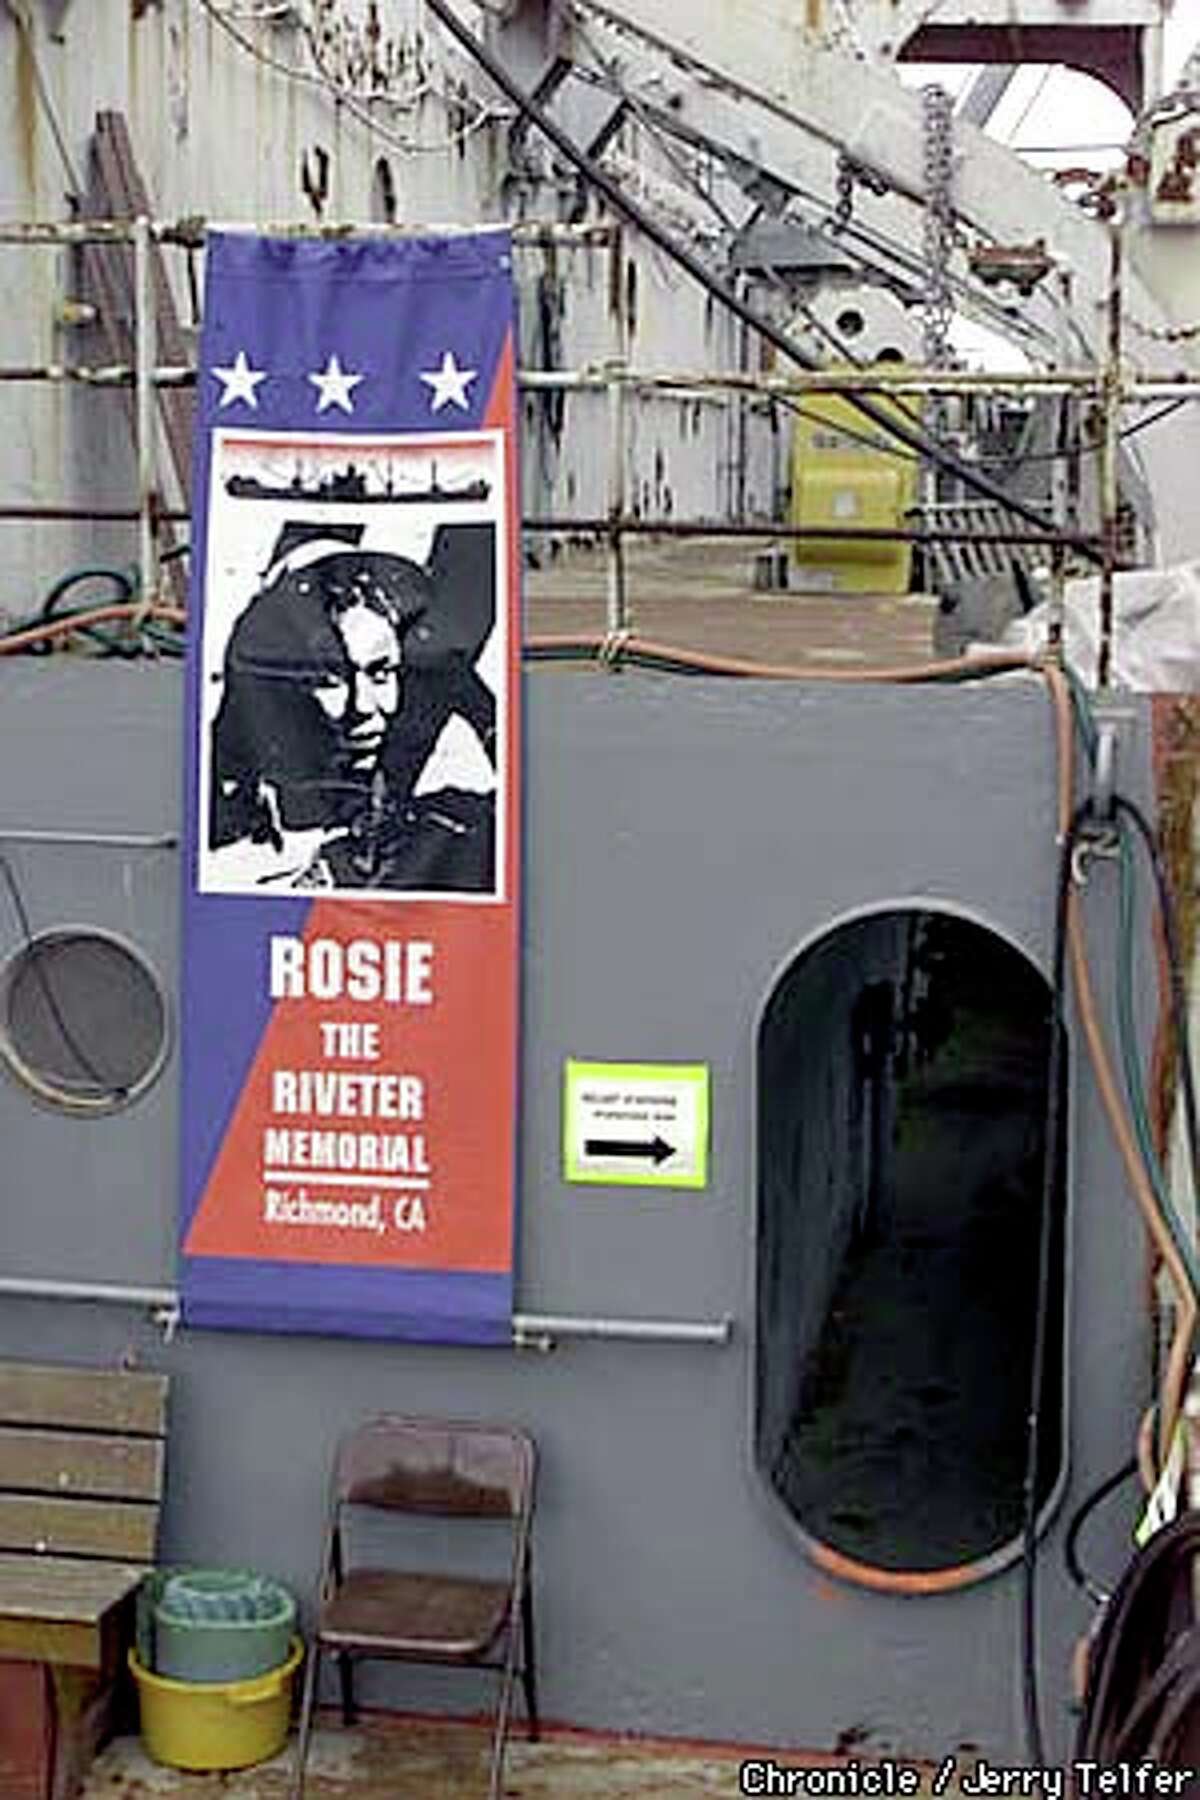 A poster on a World War II-era ship heralded the dedication of the Rosie the Riveter Memorial in Richmond. Chronicle photo by Jerry Telfer